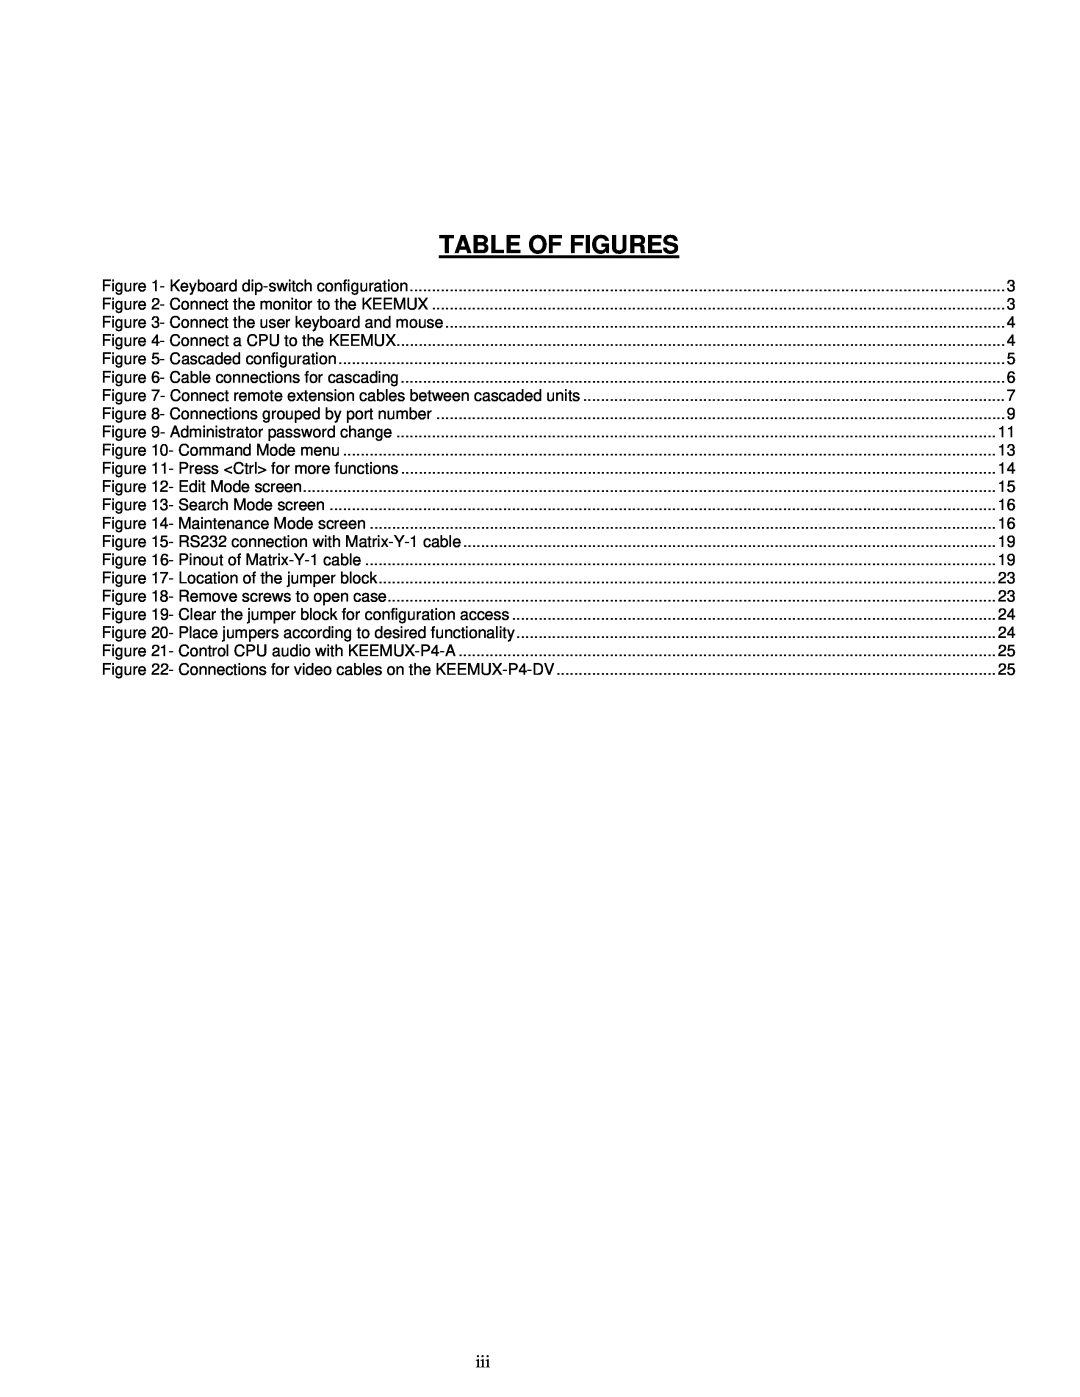 Network Technologies PS/2 KVM operation manual Table Of Figures 